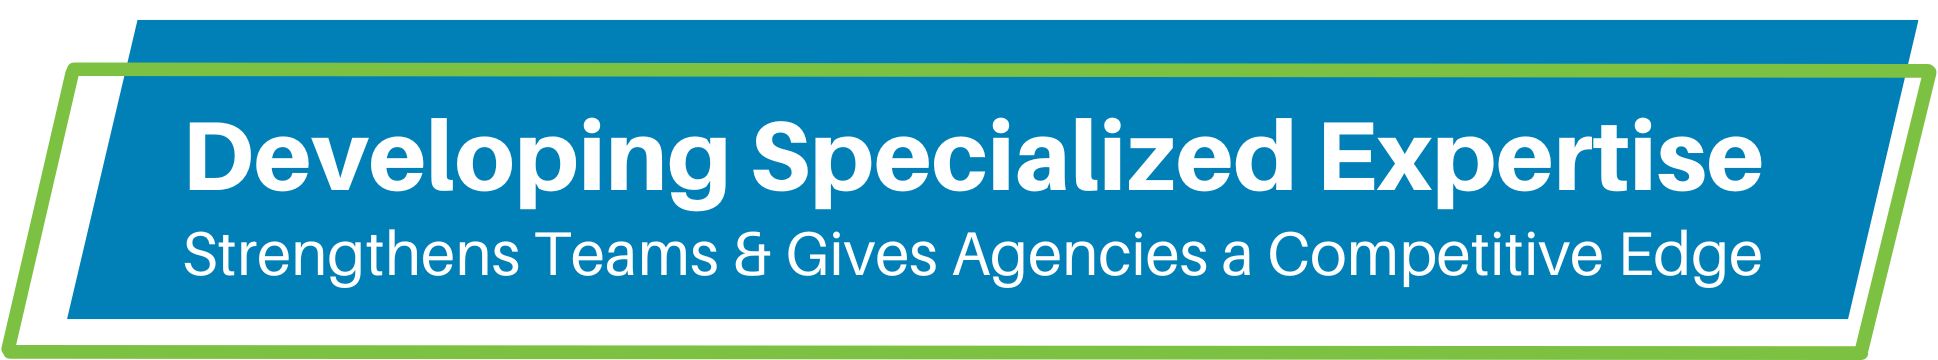 Developing Specalized Insurance Expertise Strengthens Teams and Gives Agencies a Competitive Edge